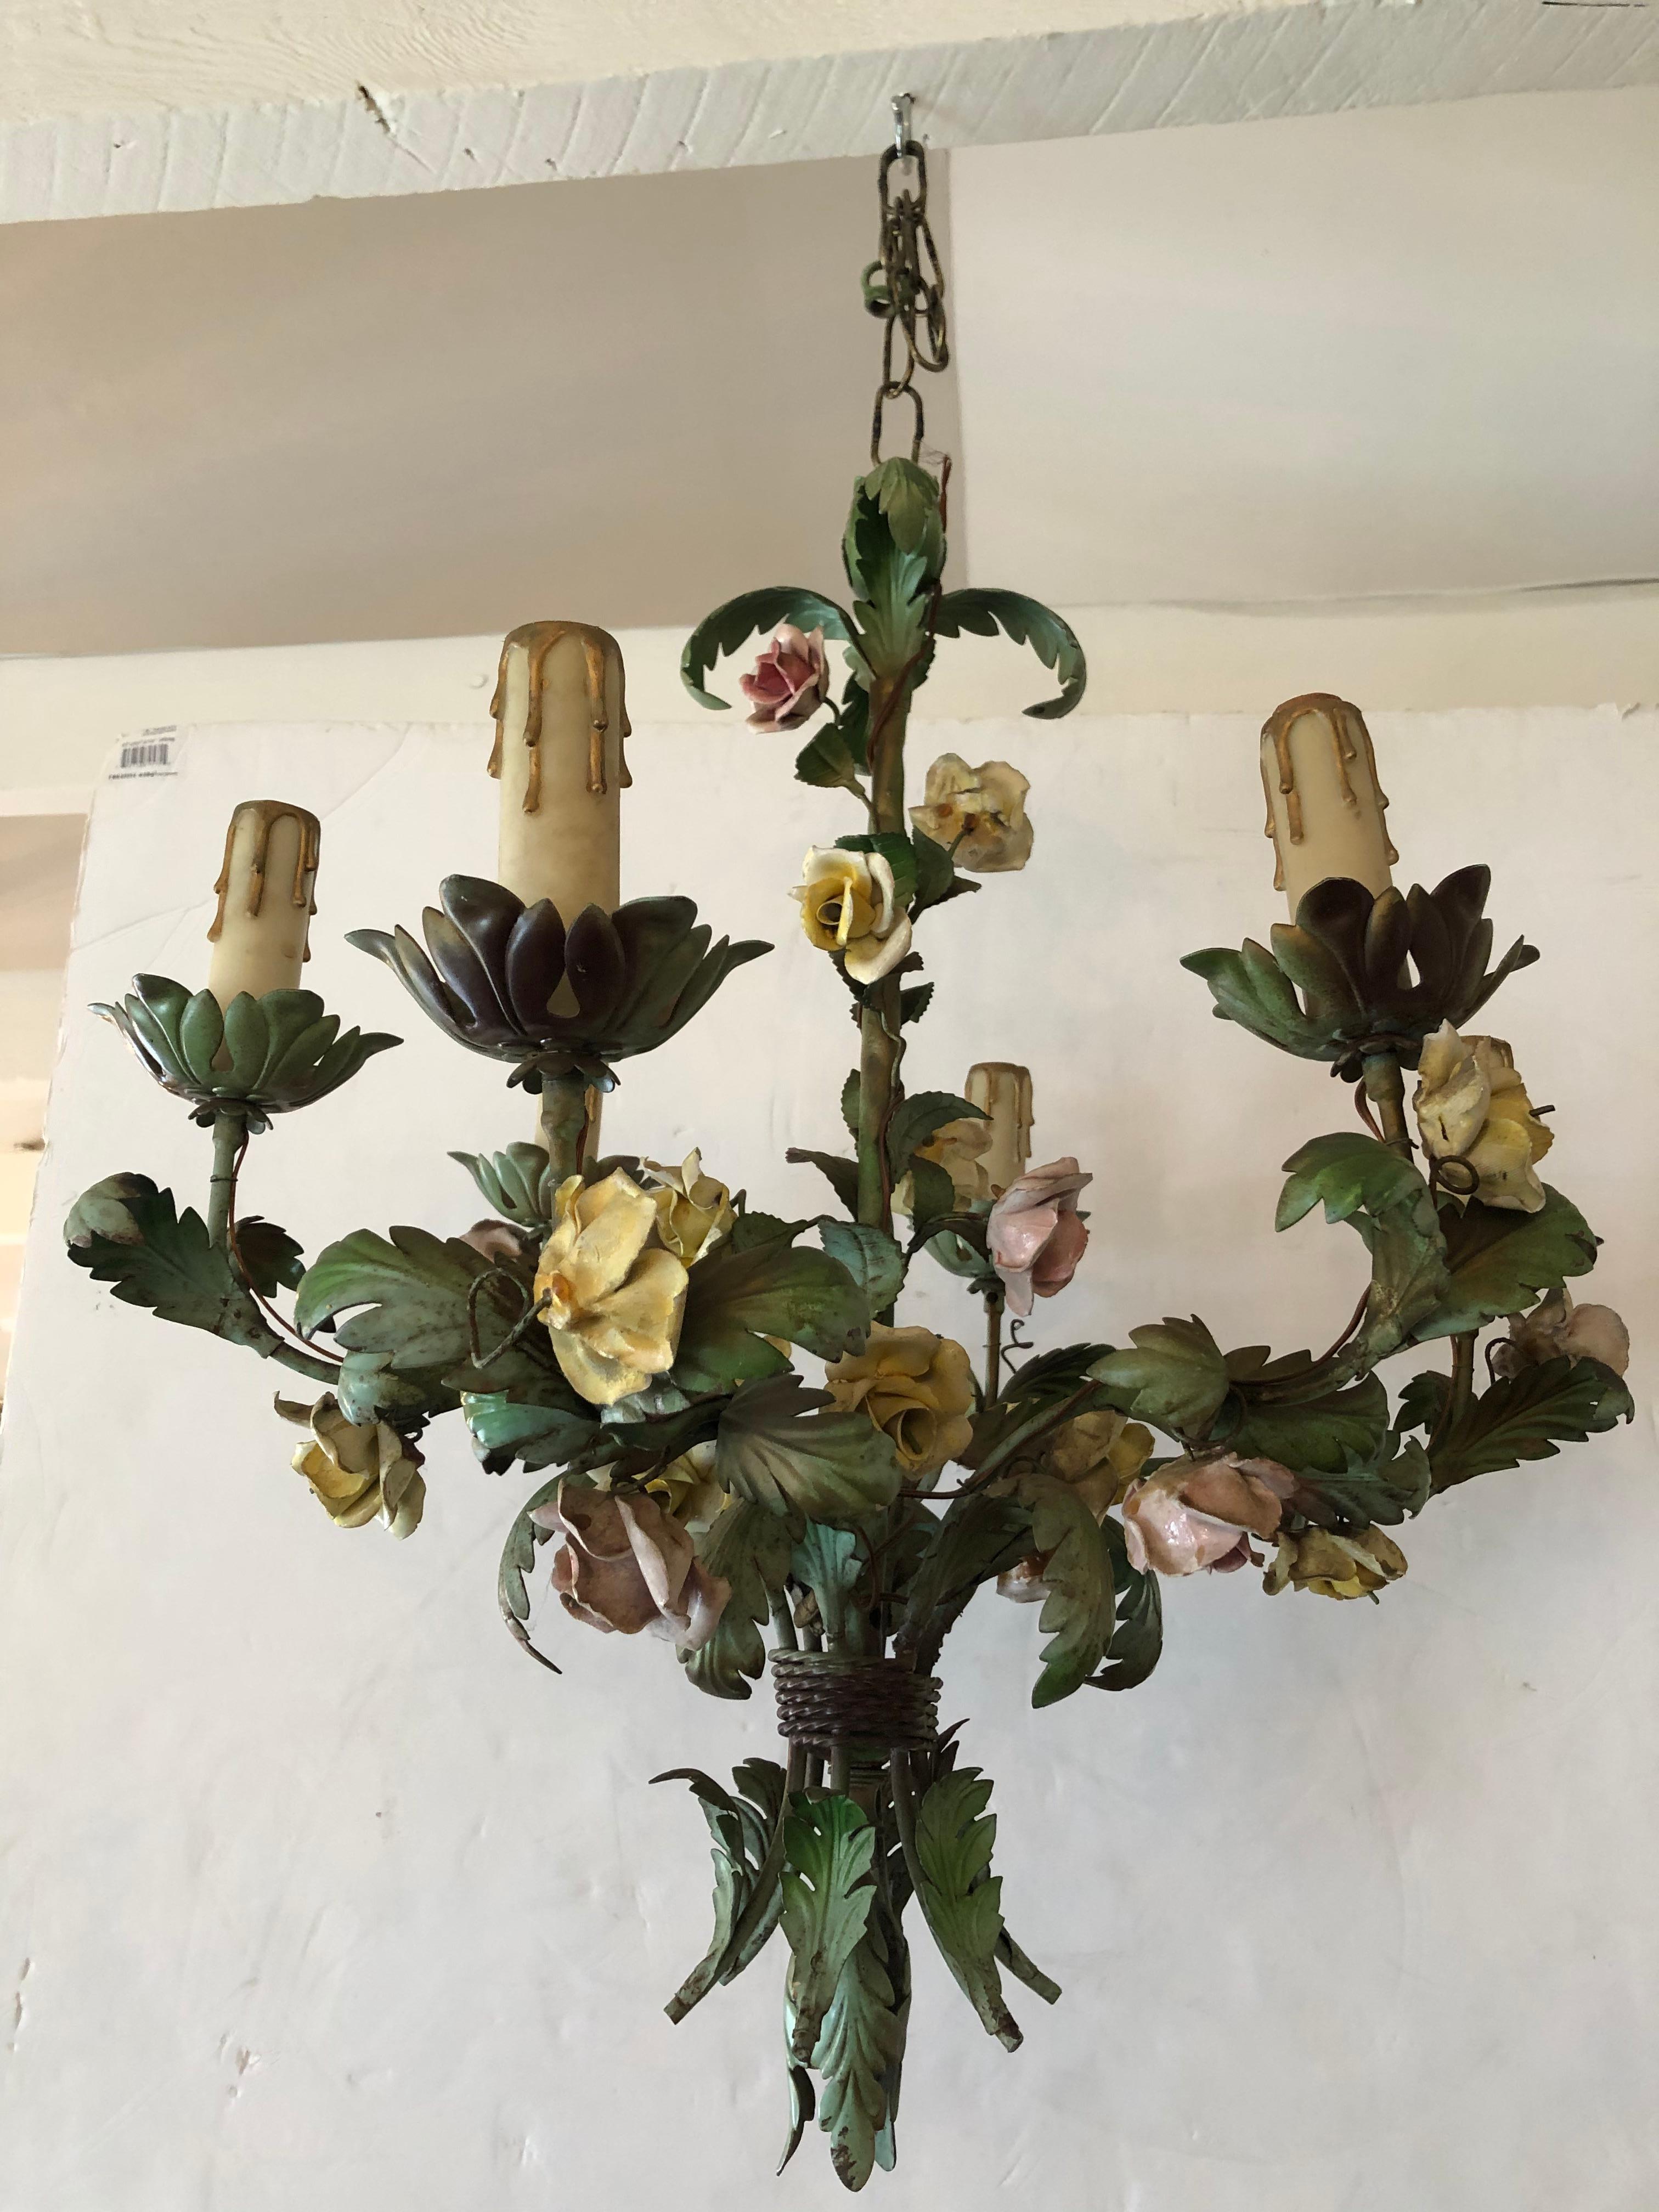 Romantic French painted iron and tole floral chandelier having muted pastel colors and porcelain flowers adorning 6 arms and drip candlesticks.

12